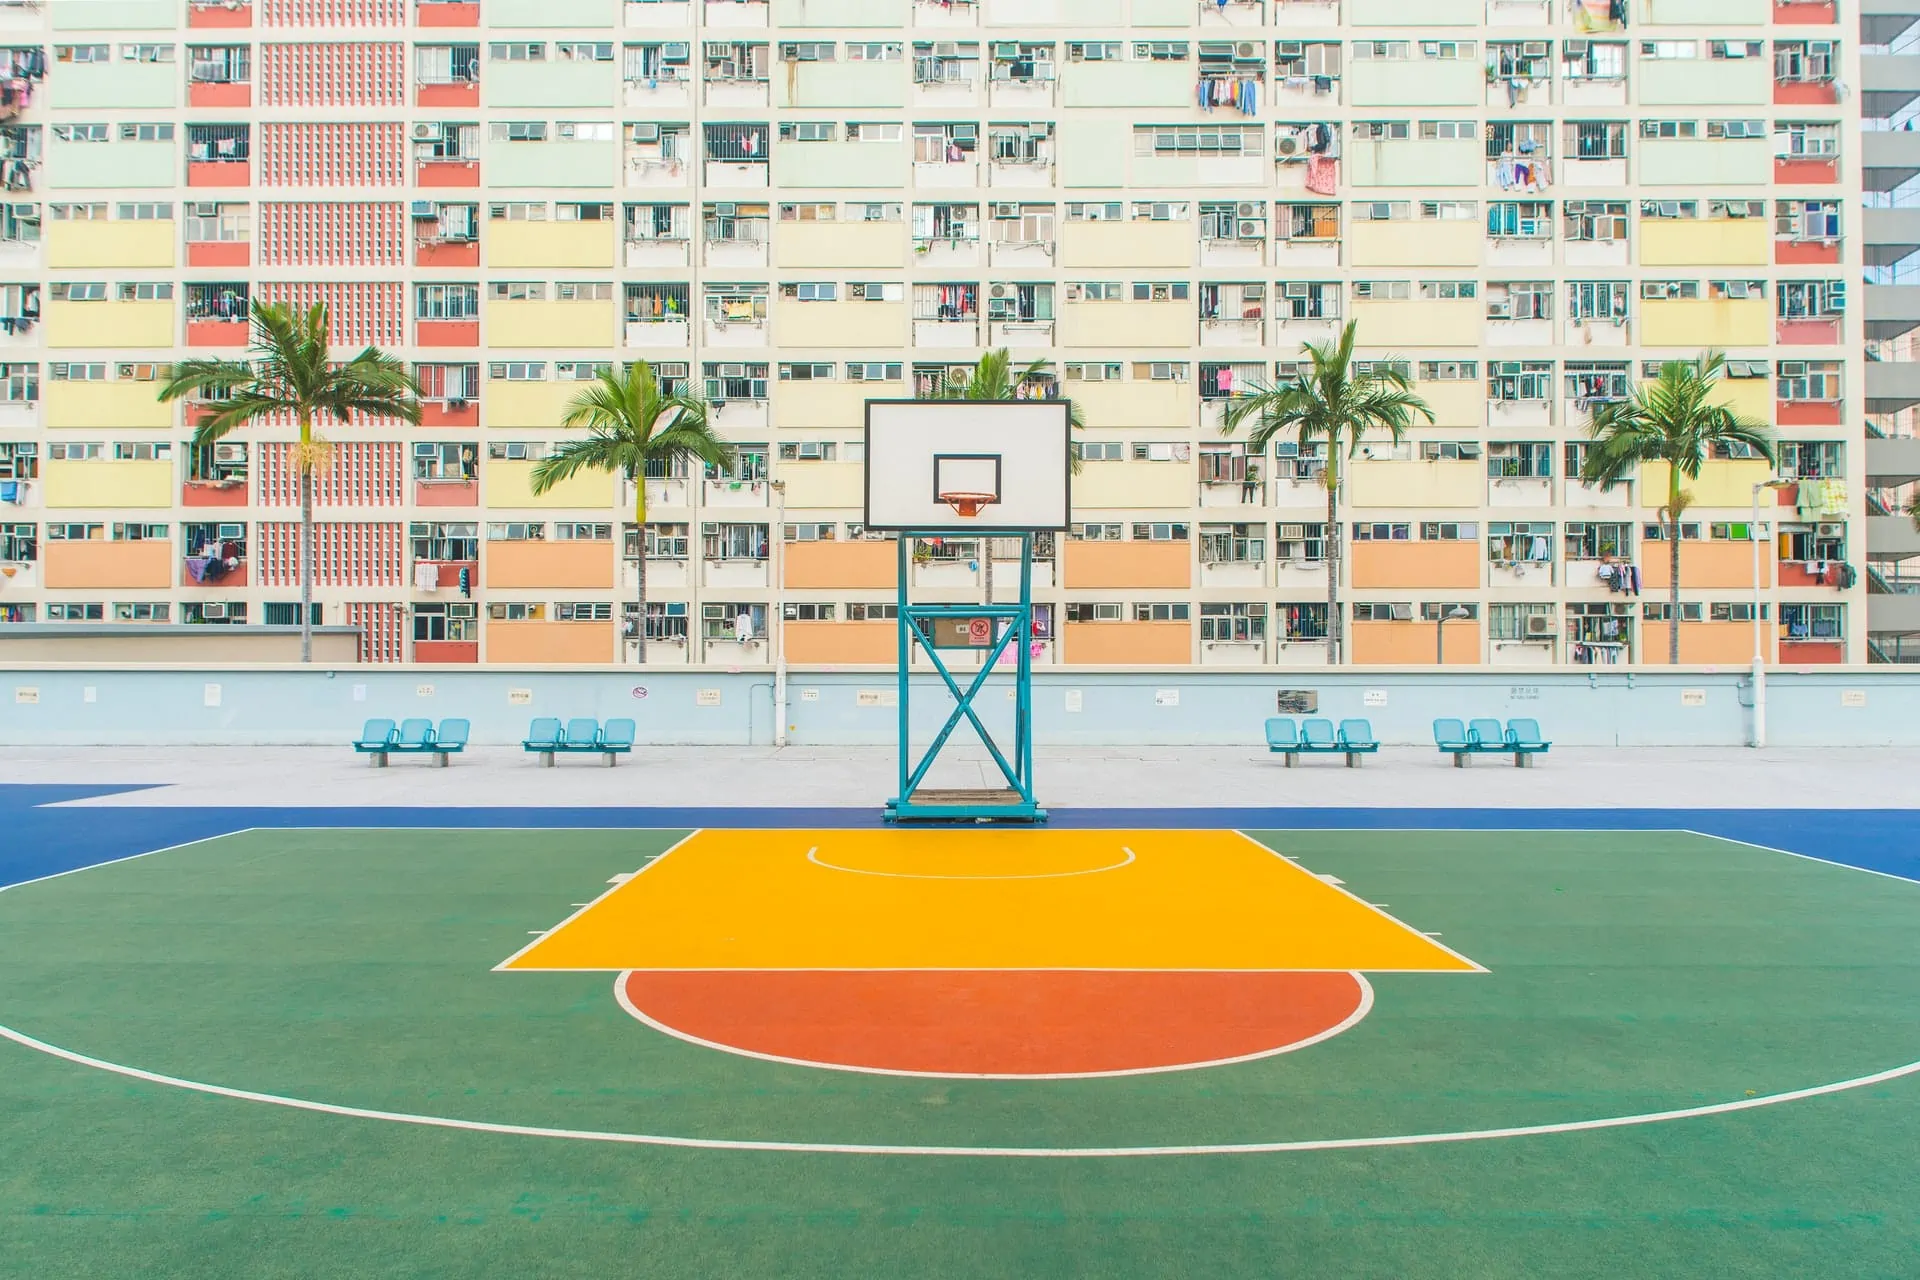 How to Build a Basketball Court